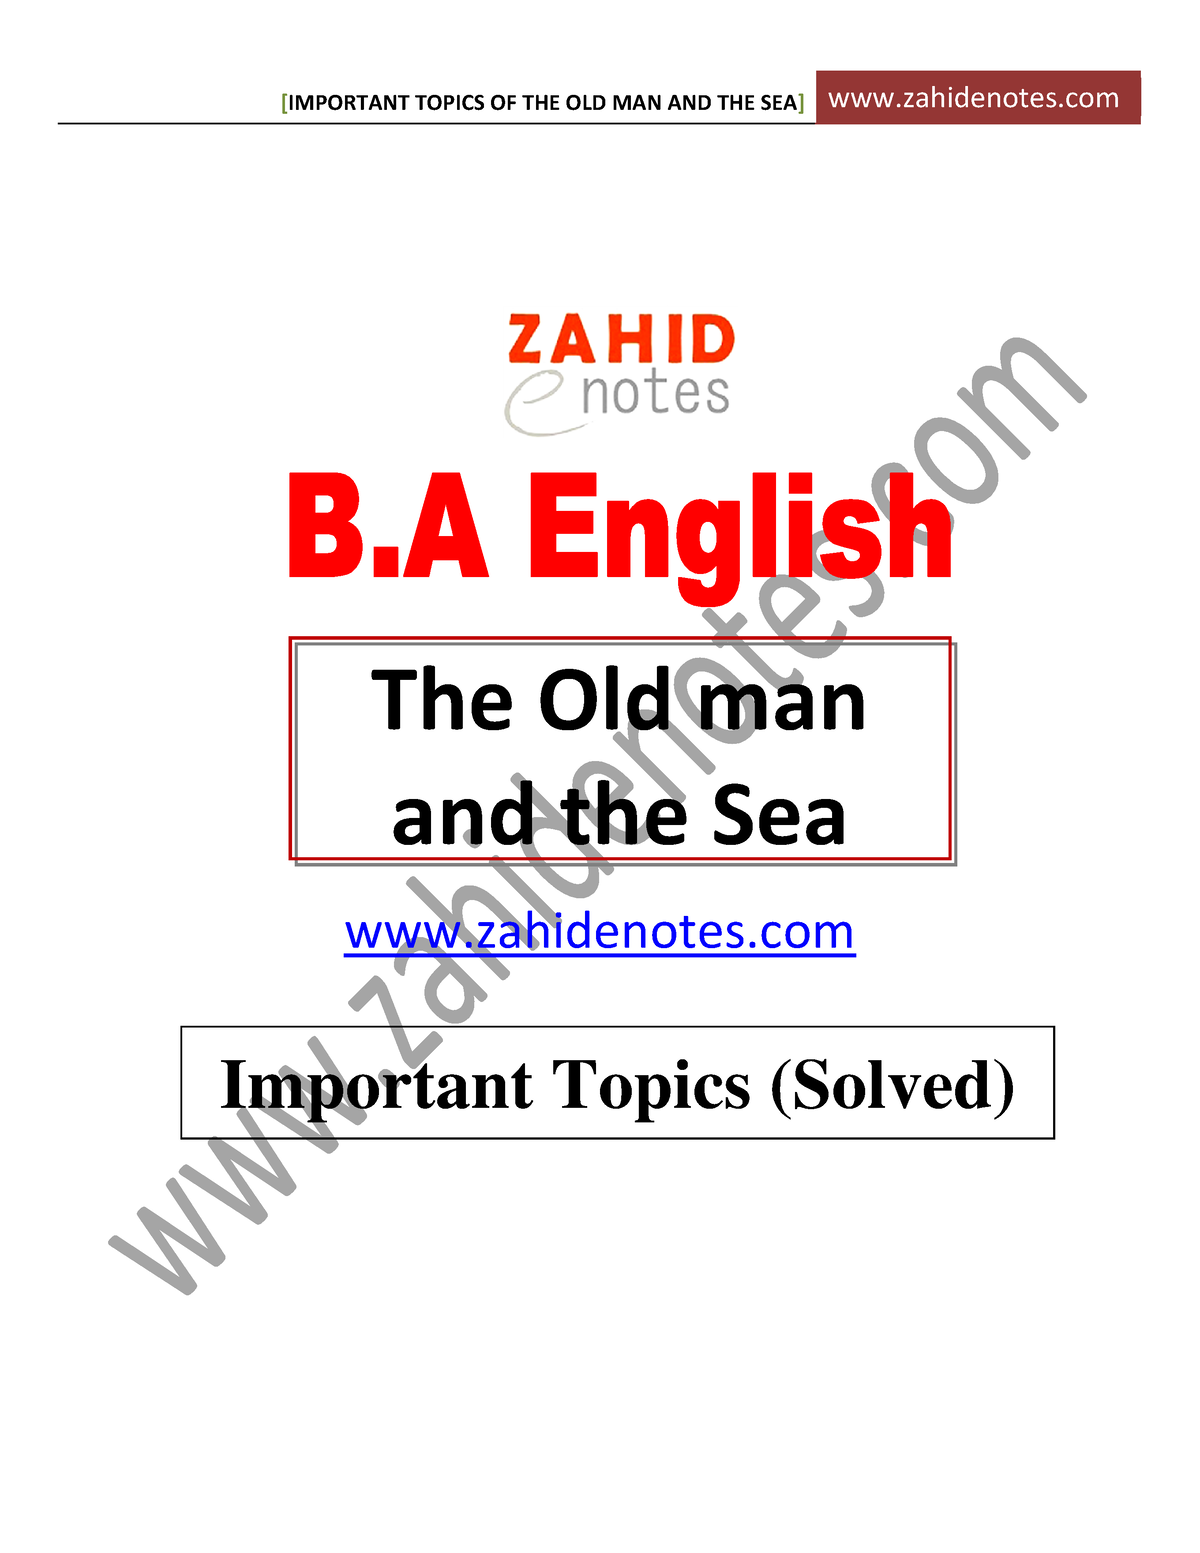 Old Man and the Sea - Old man and sea motes fir everone - B. English Notes  Old Man and The Sea Old - Studocu